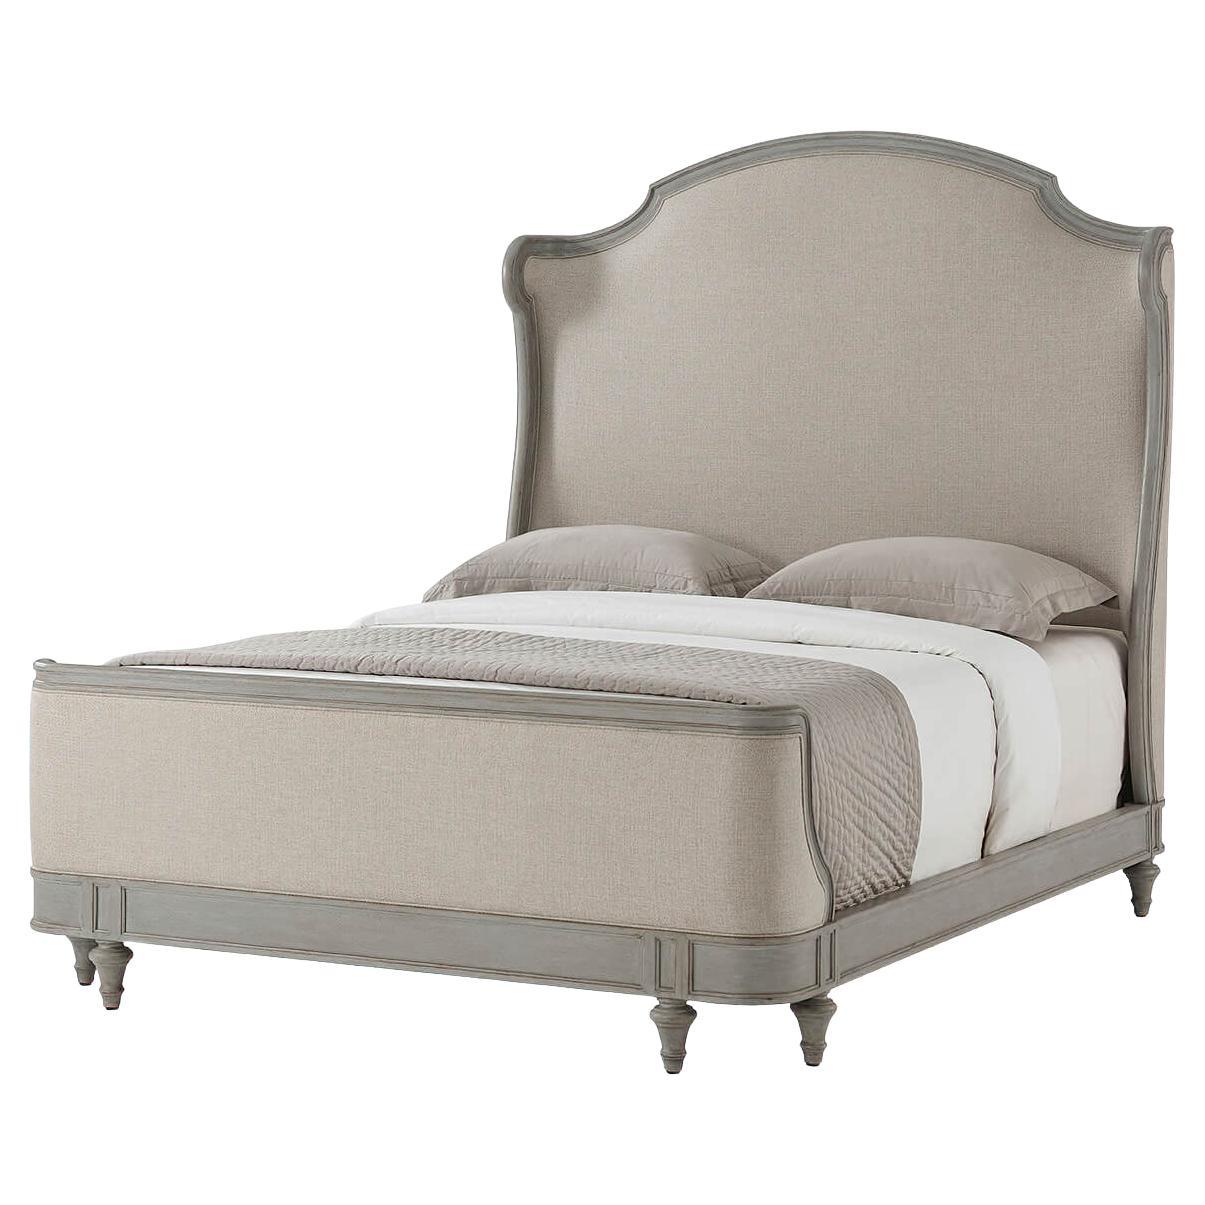 Provincial Painted Queen Size Bed For Sale